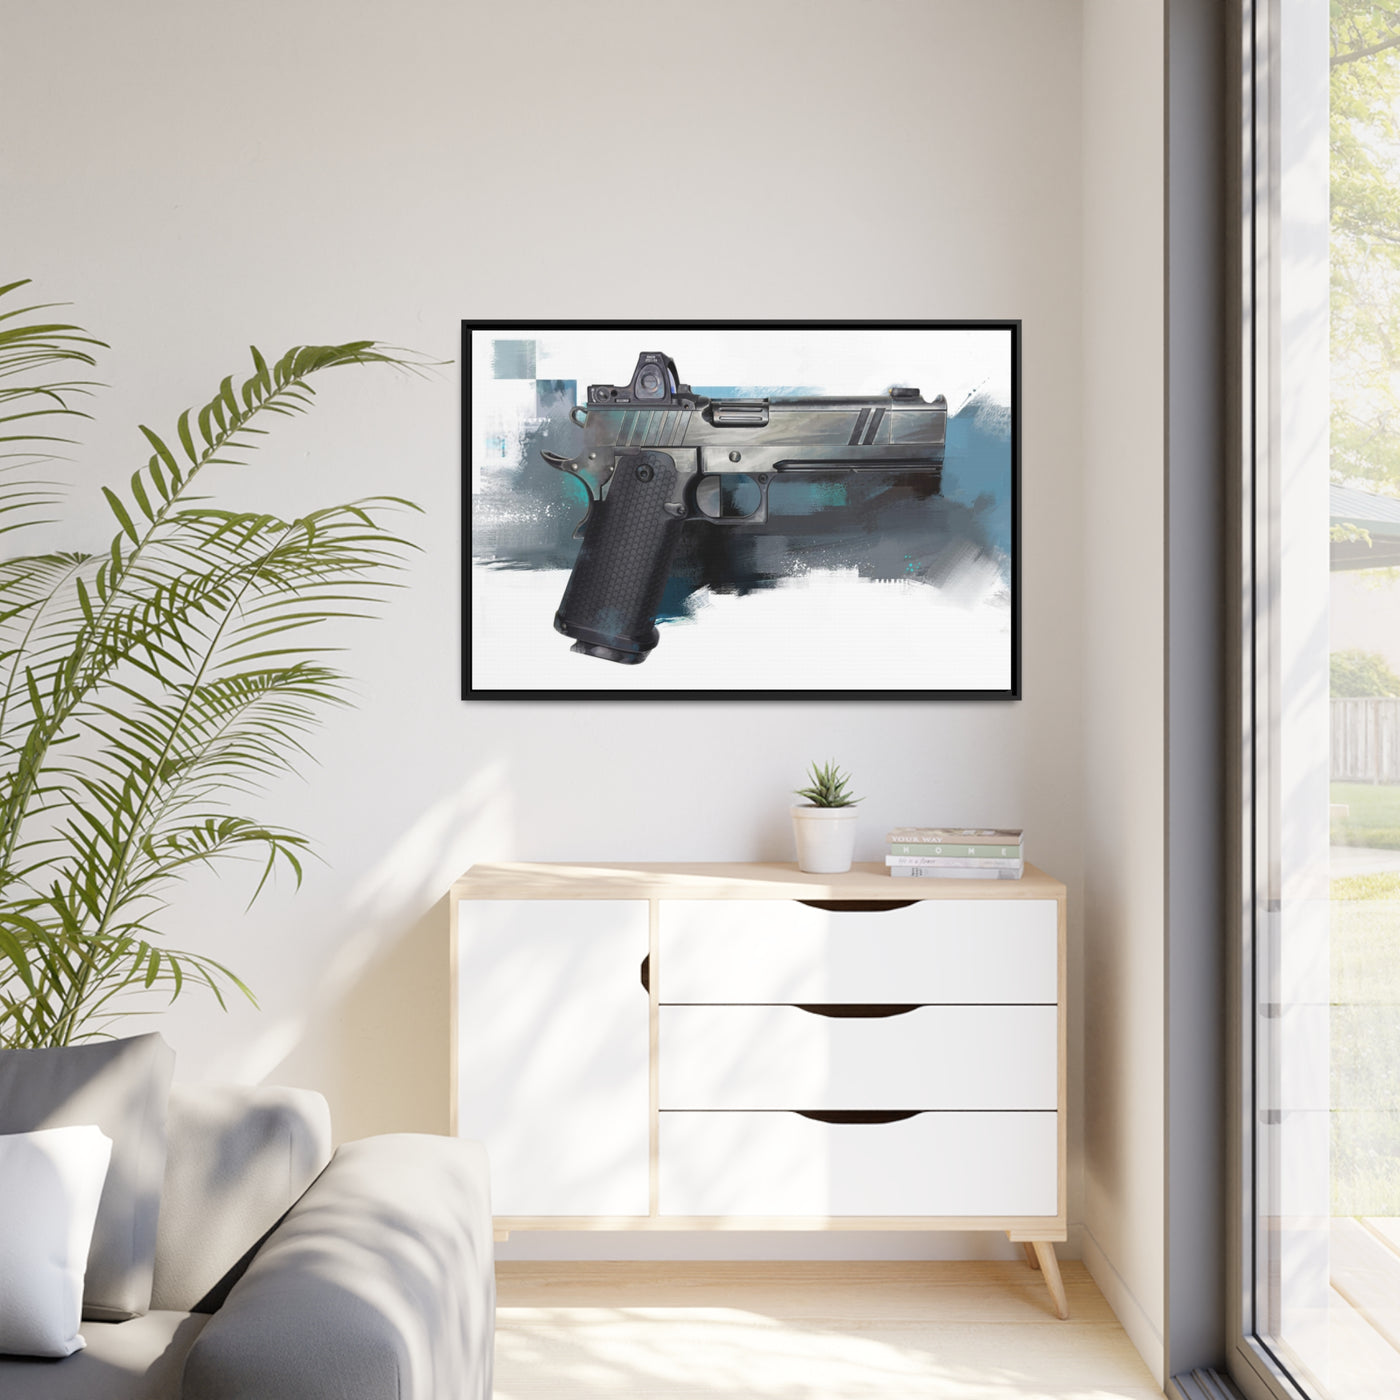 2011 Bravo - Pistol Painting - Black Framed Wrapped Canvas - Value Collection